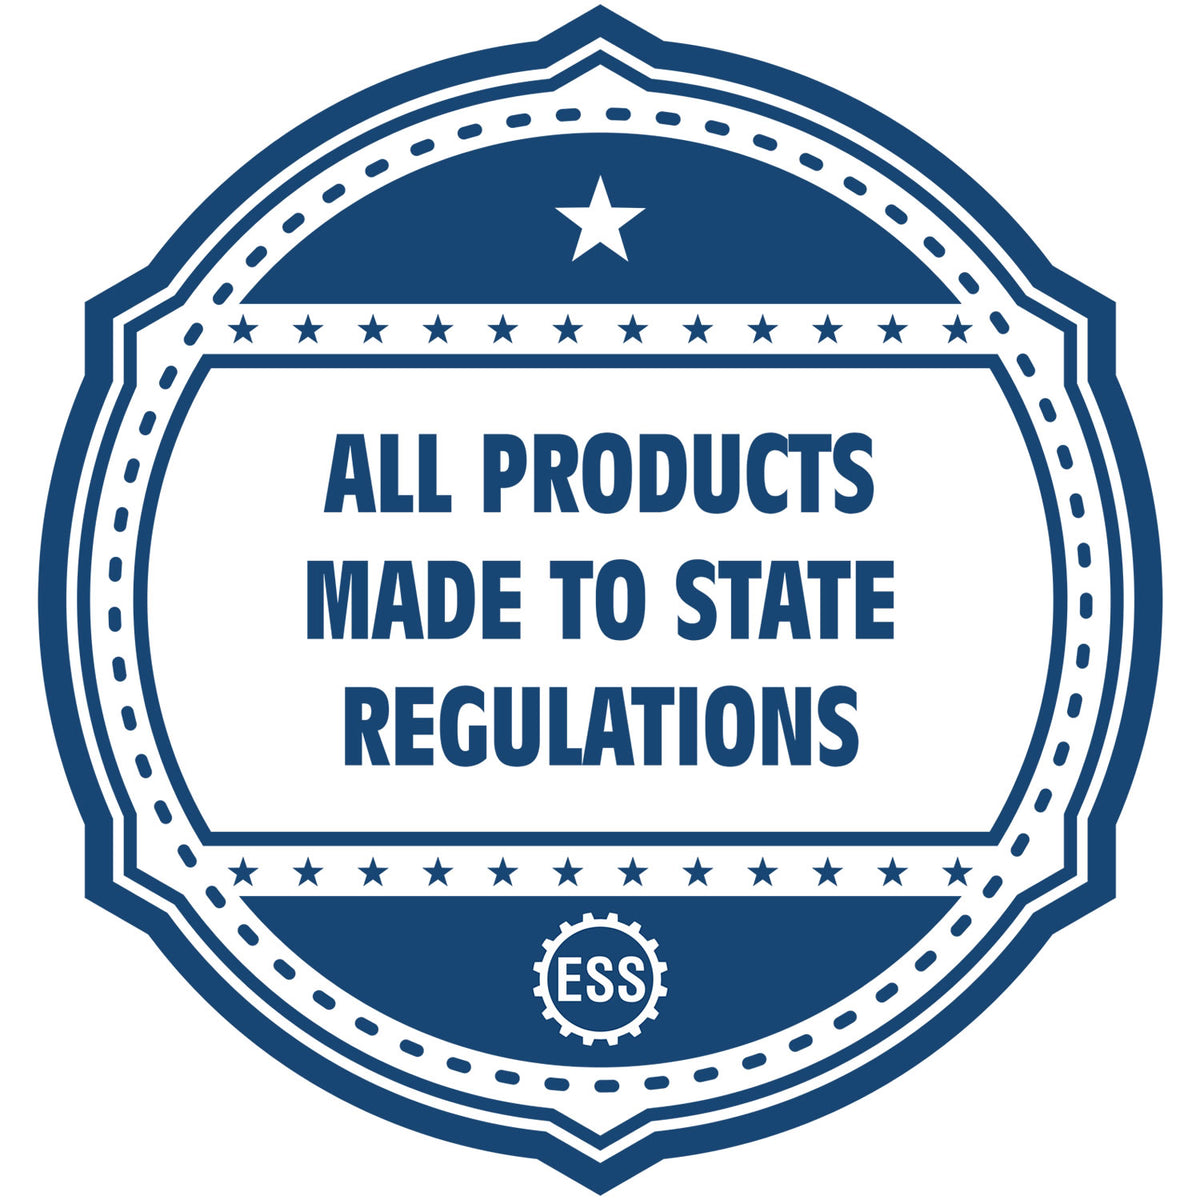 An icon or badge element for the Digital Nebraska PE Stamp and Electronic Seal for Nebraska Engineer showing that this product is made in compliance with state regulations.